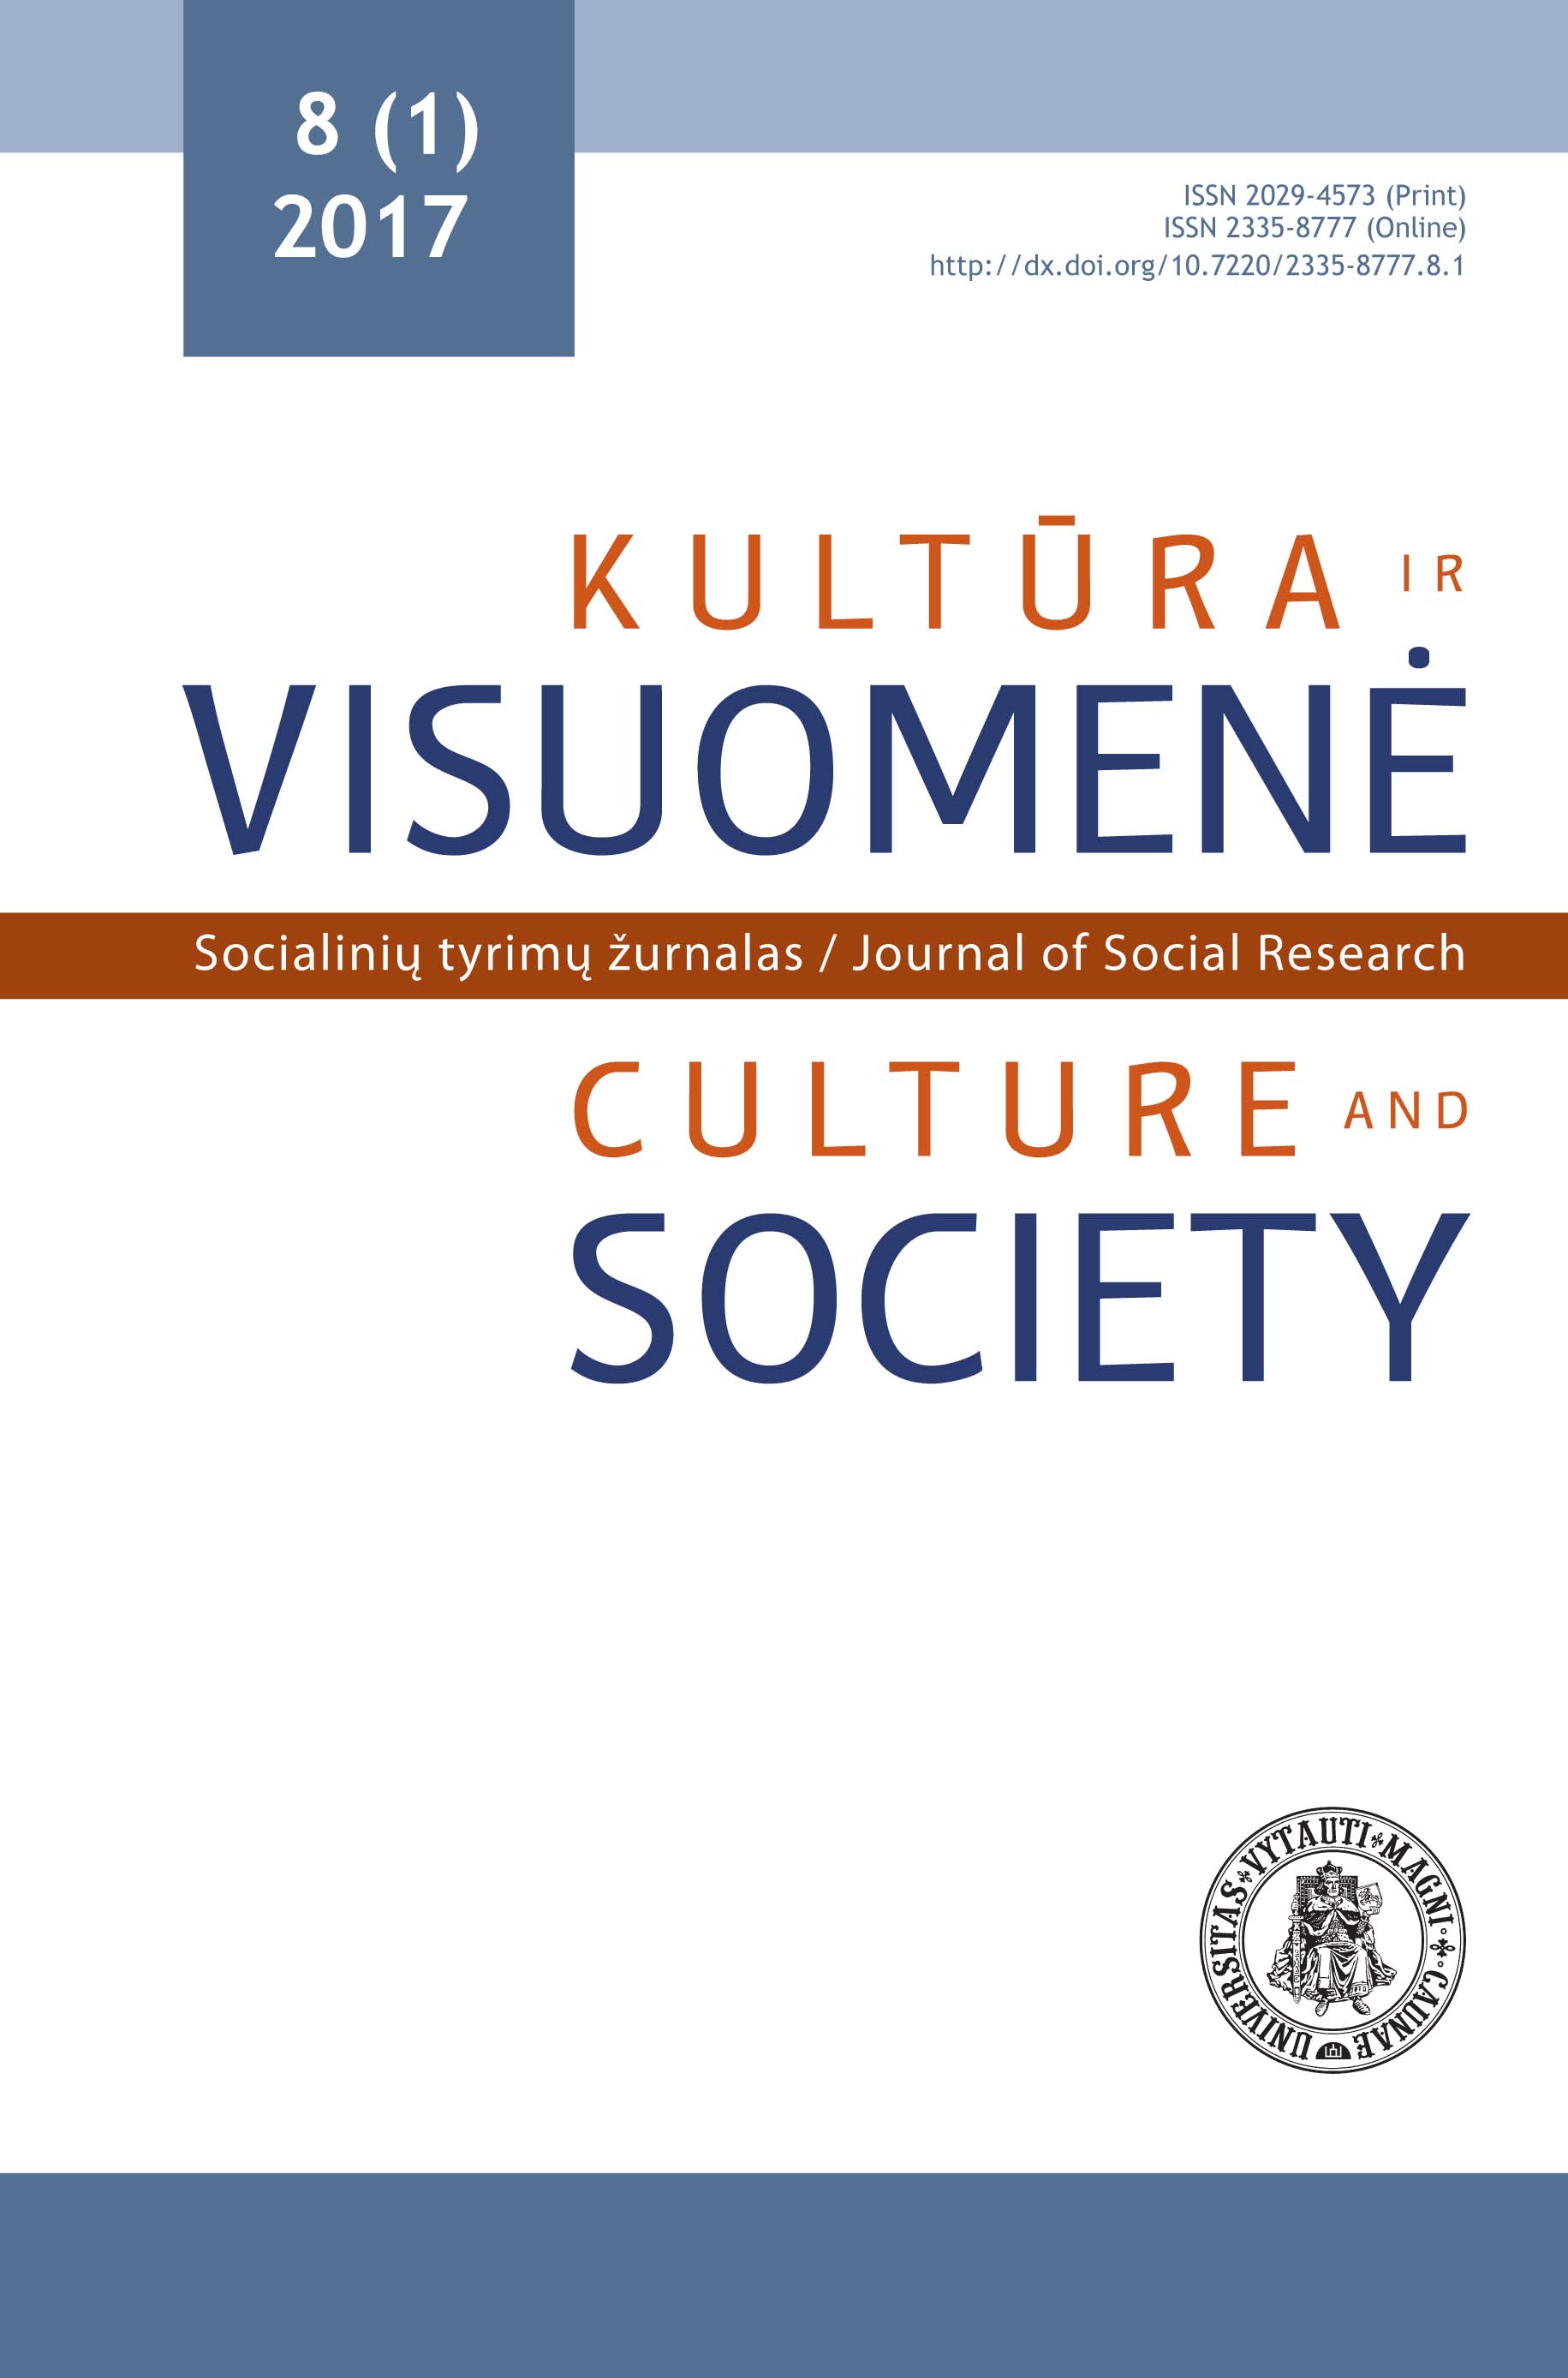 Single-mother Families and Models of Intergenerational Support in Lithuania Cover Image